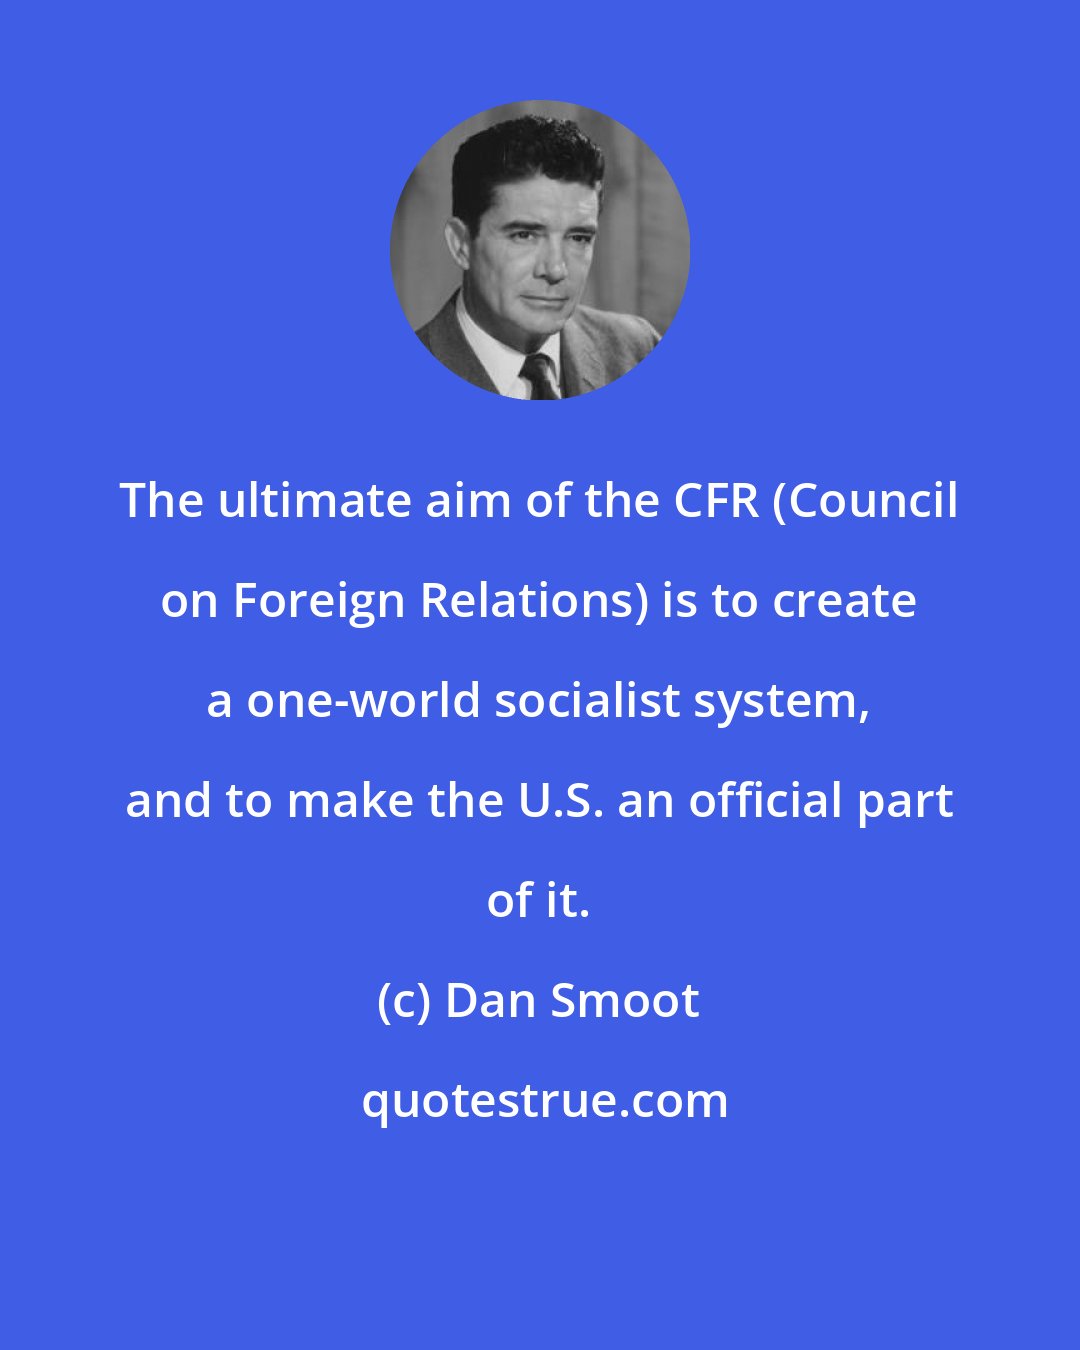 Dan Smoot: The ultimate aim of the CFR (Council on Foreign Relations) is to create a one-world socialist system, and to make the U.S. an official part of it.